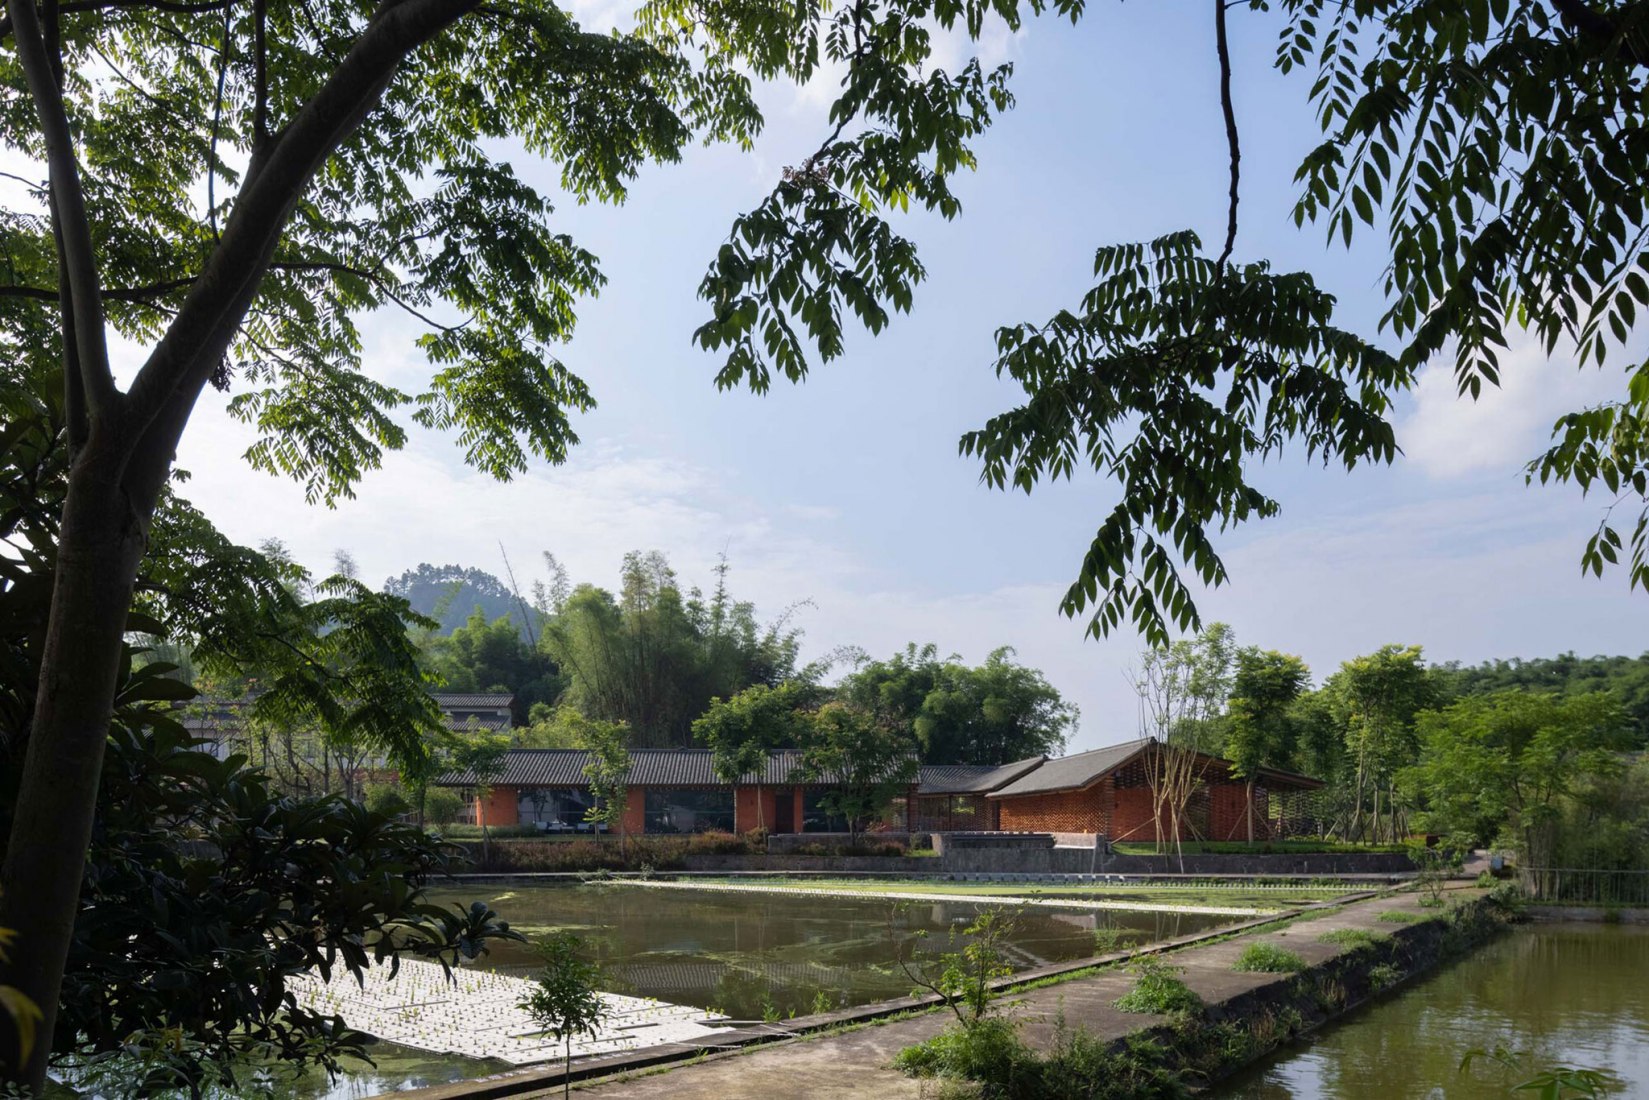 Shanshui Firewood Garden complex by Mix Architecture. Photograph by Arch-Exist.